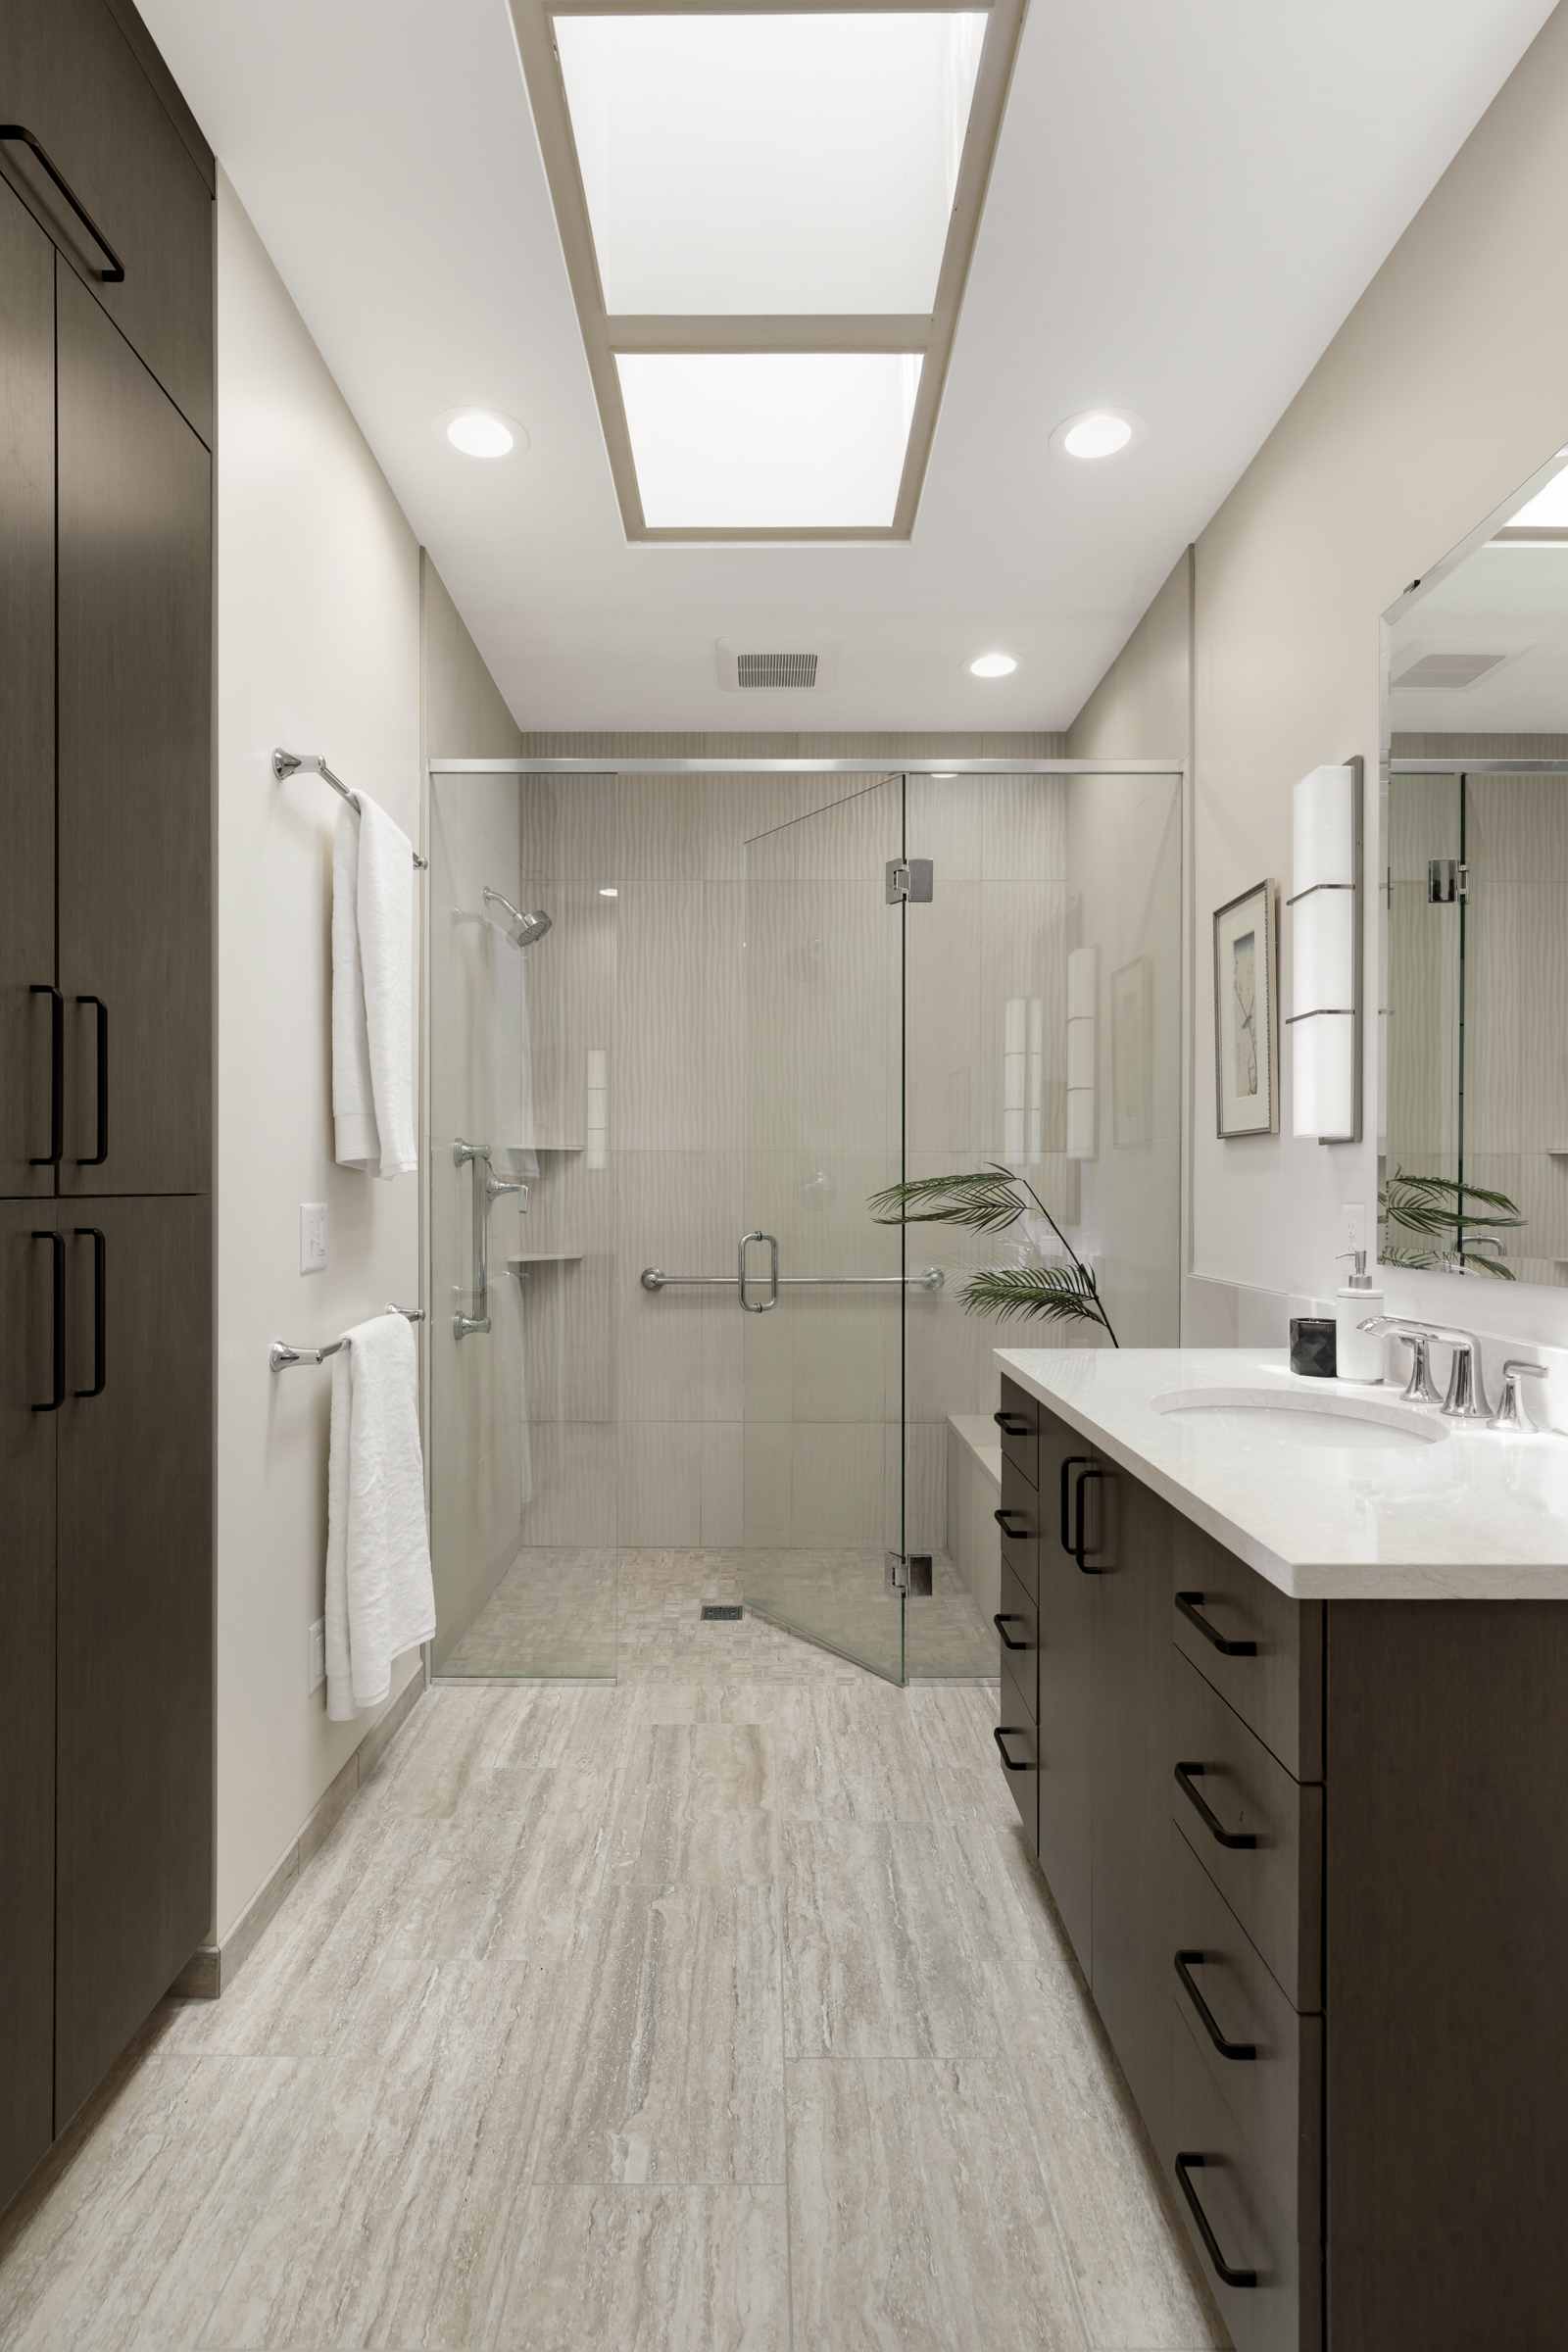 Bathroom remodel with skylights, walk in glass shower, and dark wood cabintry